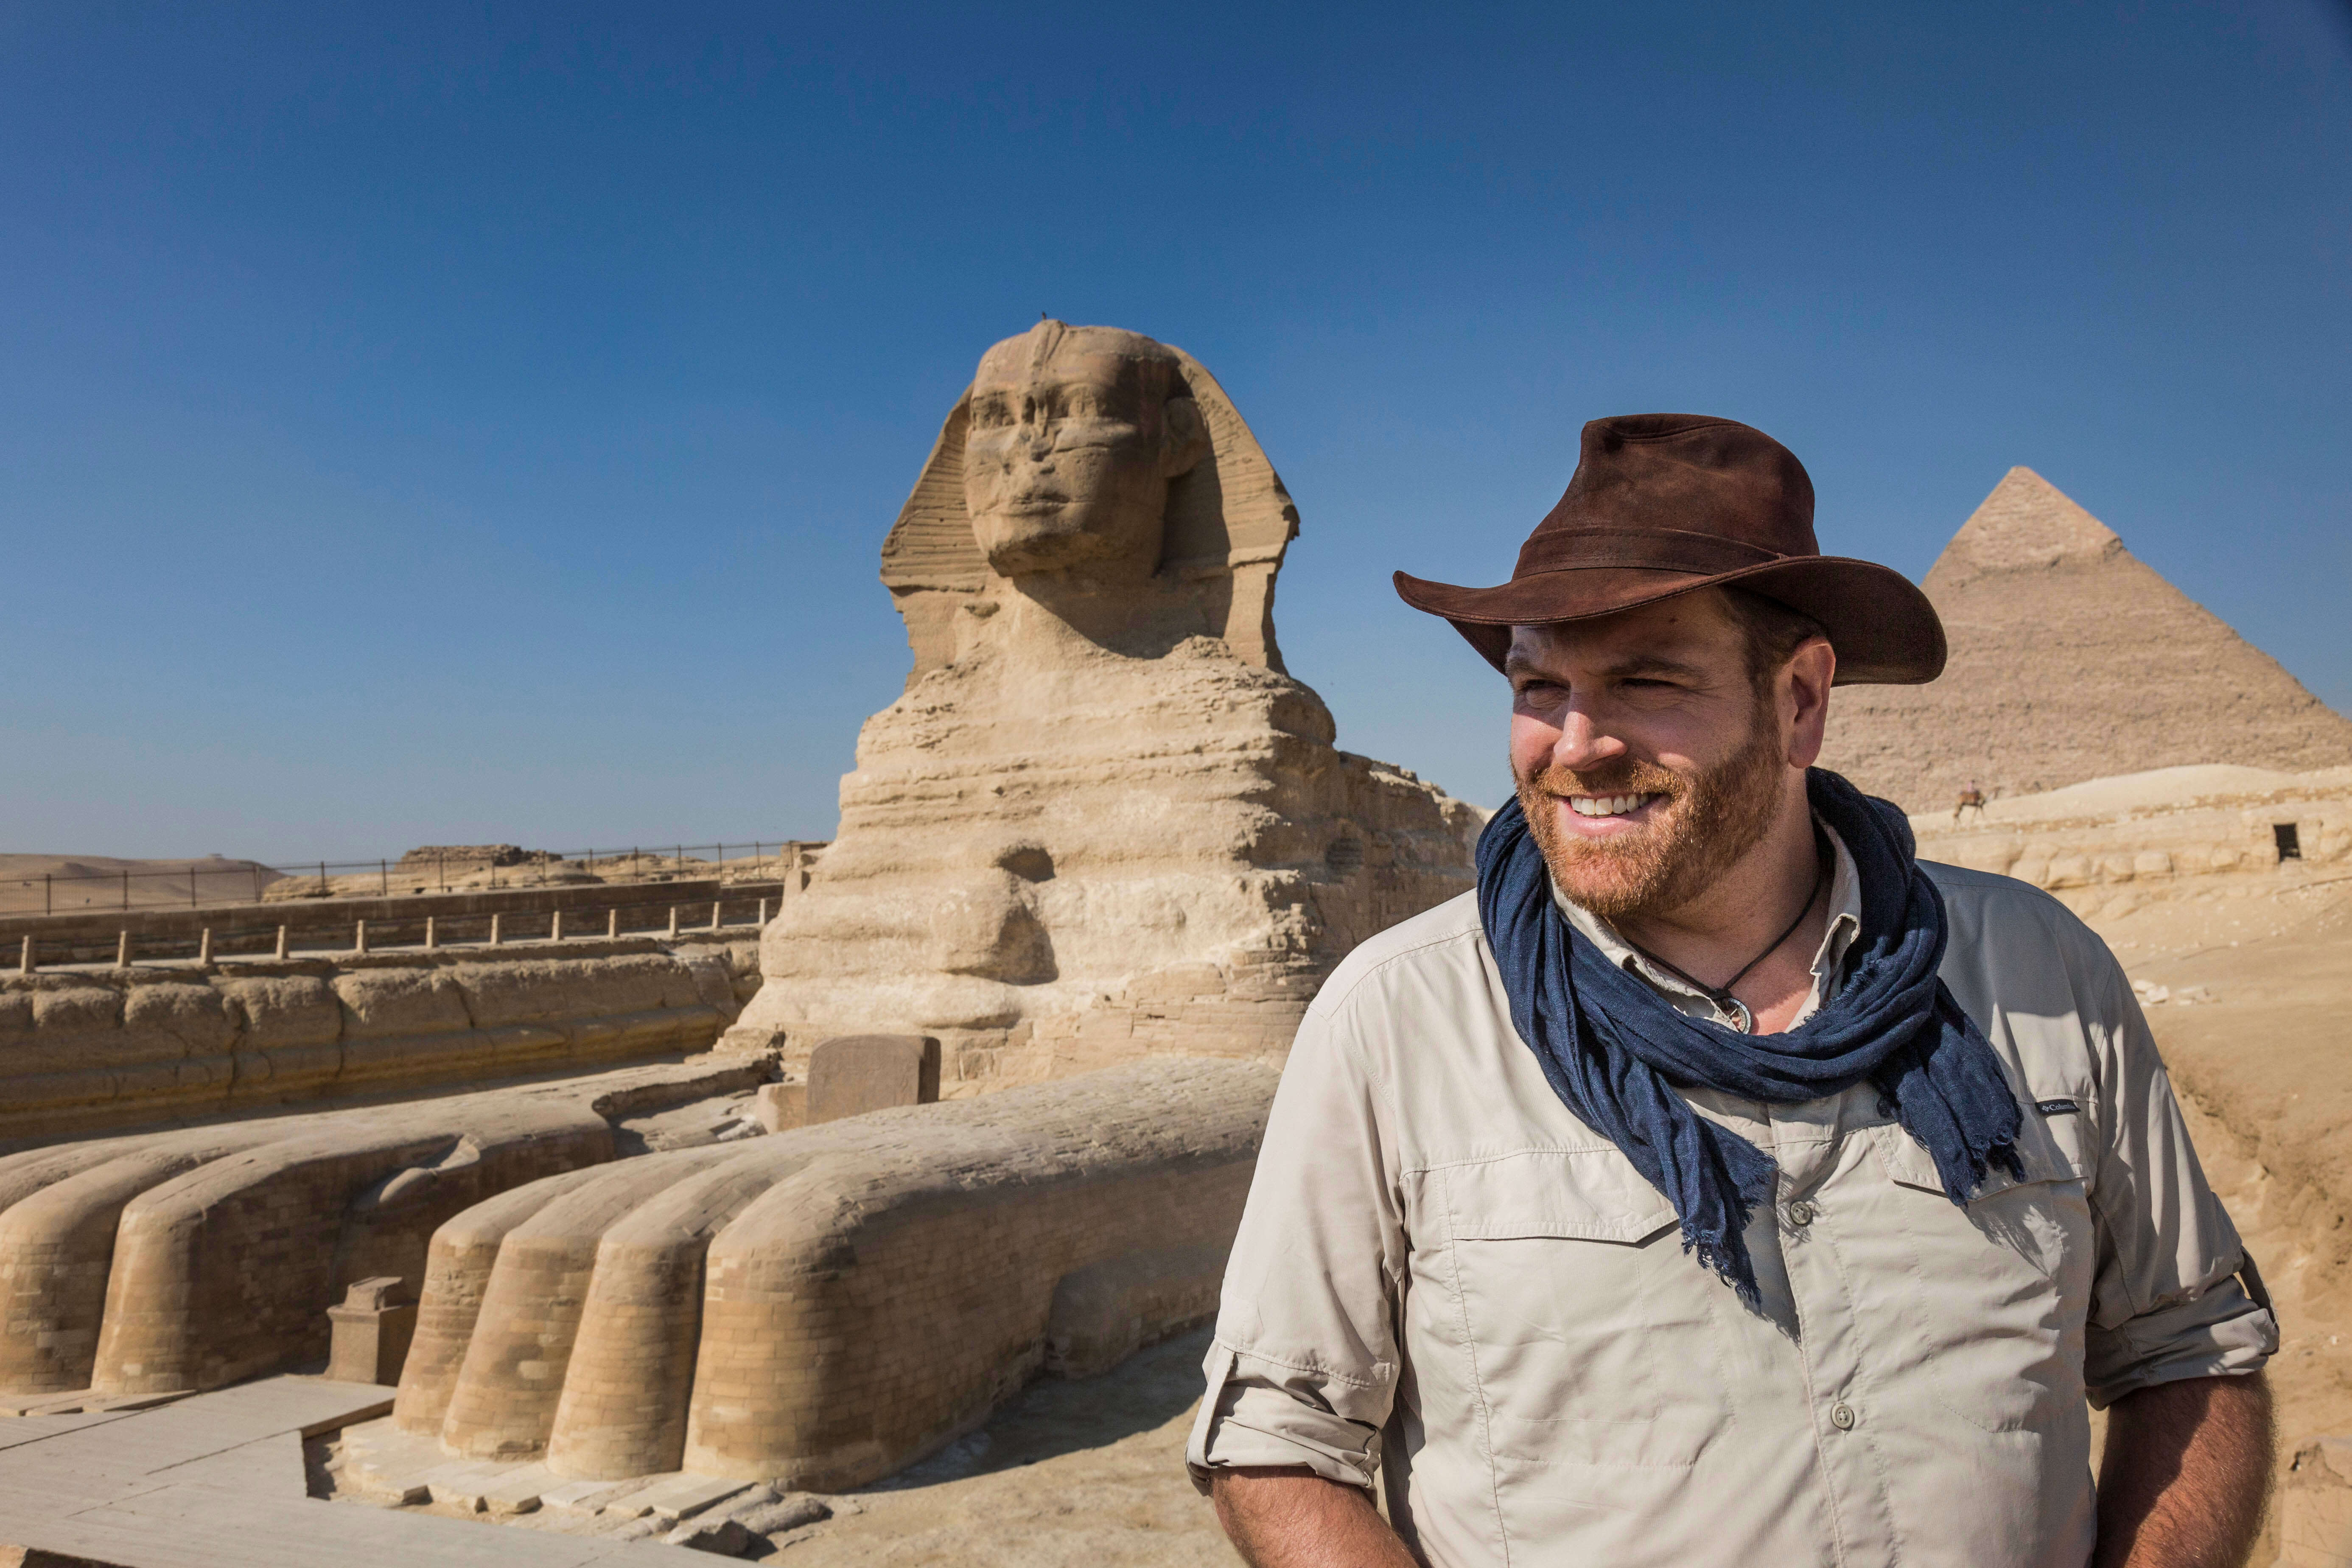 The Giza Pyramid Sphinx, Josh Gates, Expedition Unknown
foto: Discovery Channel